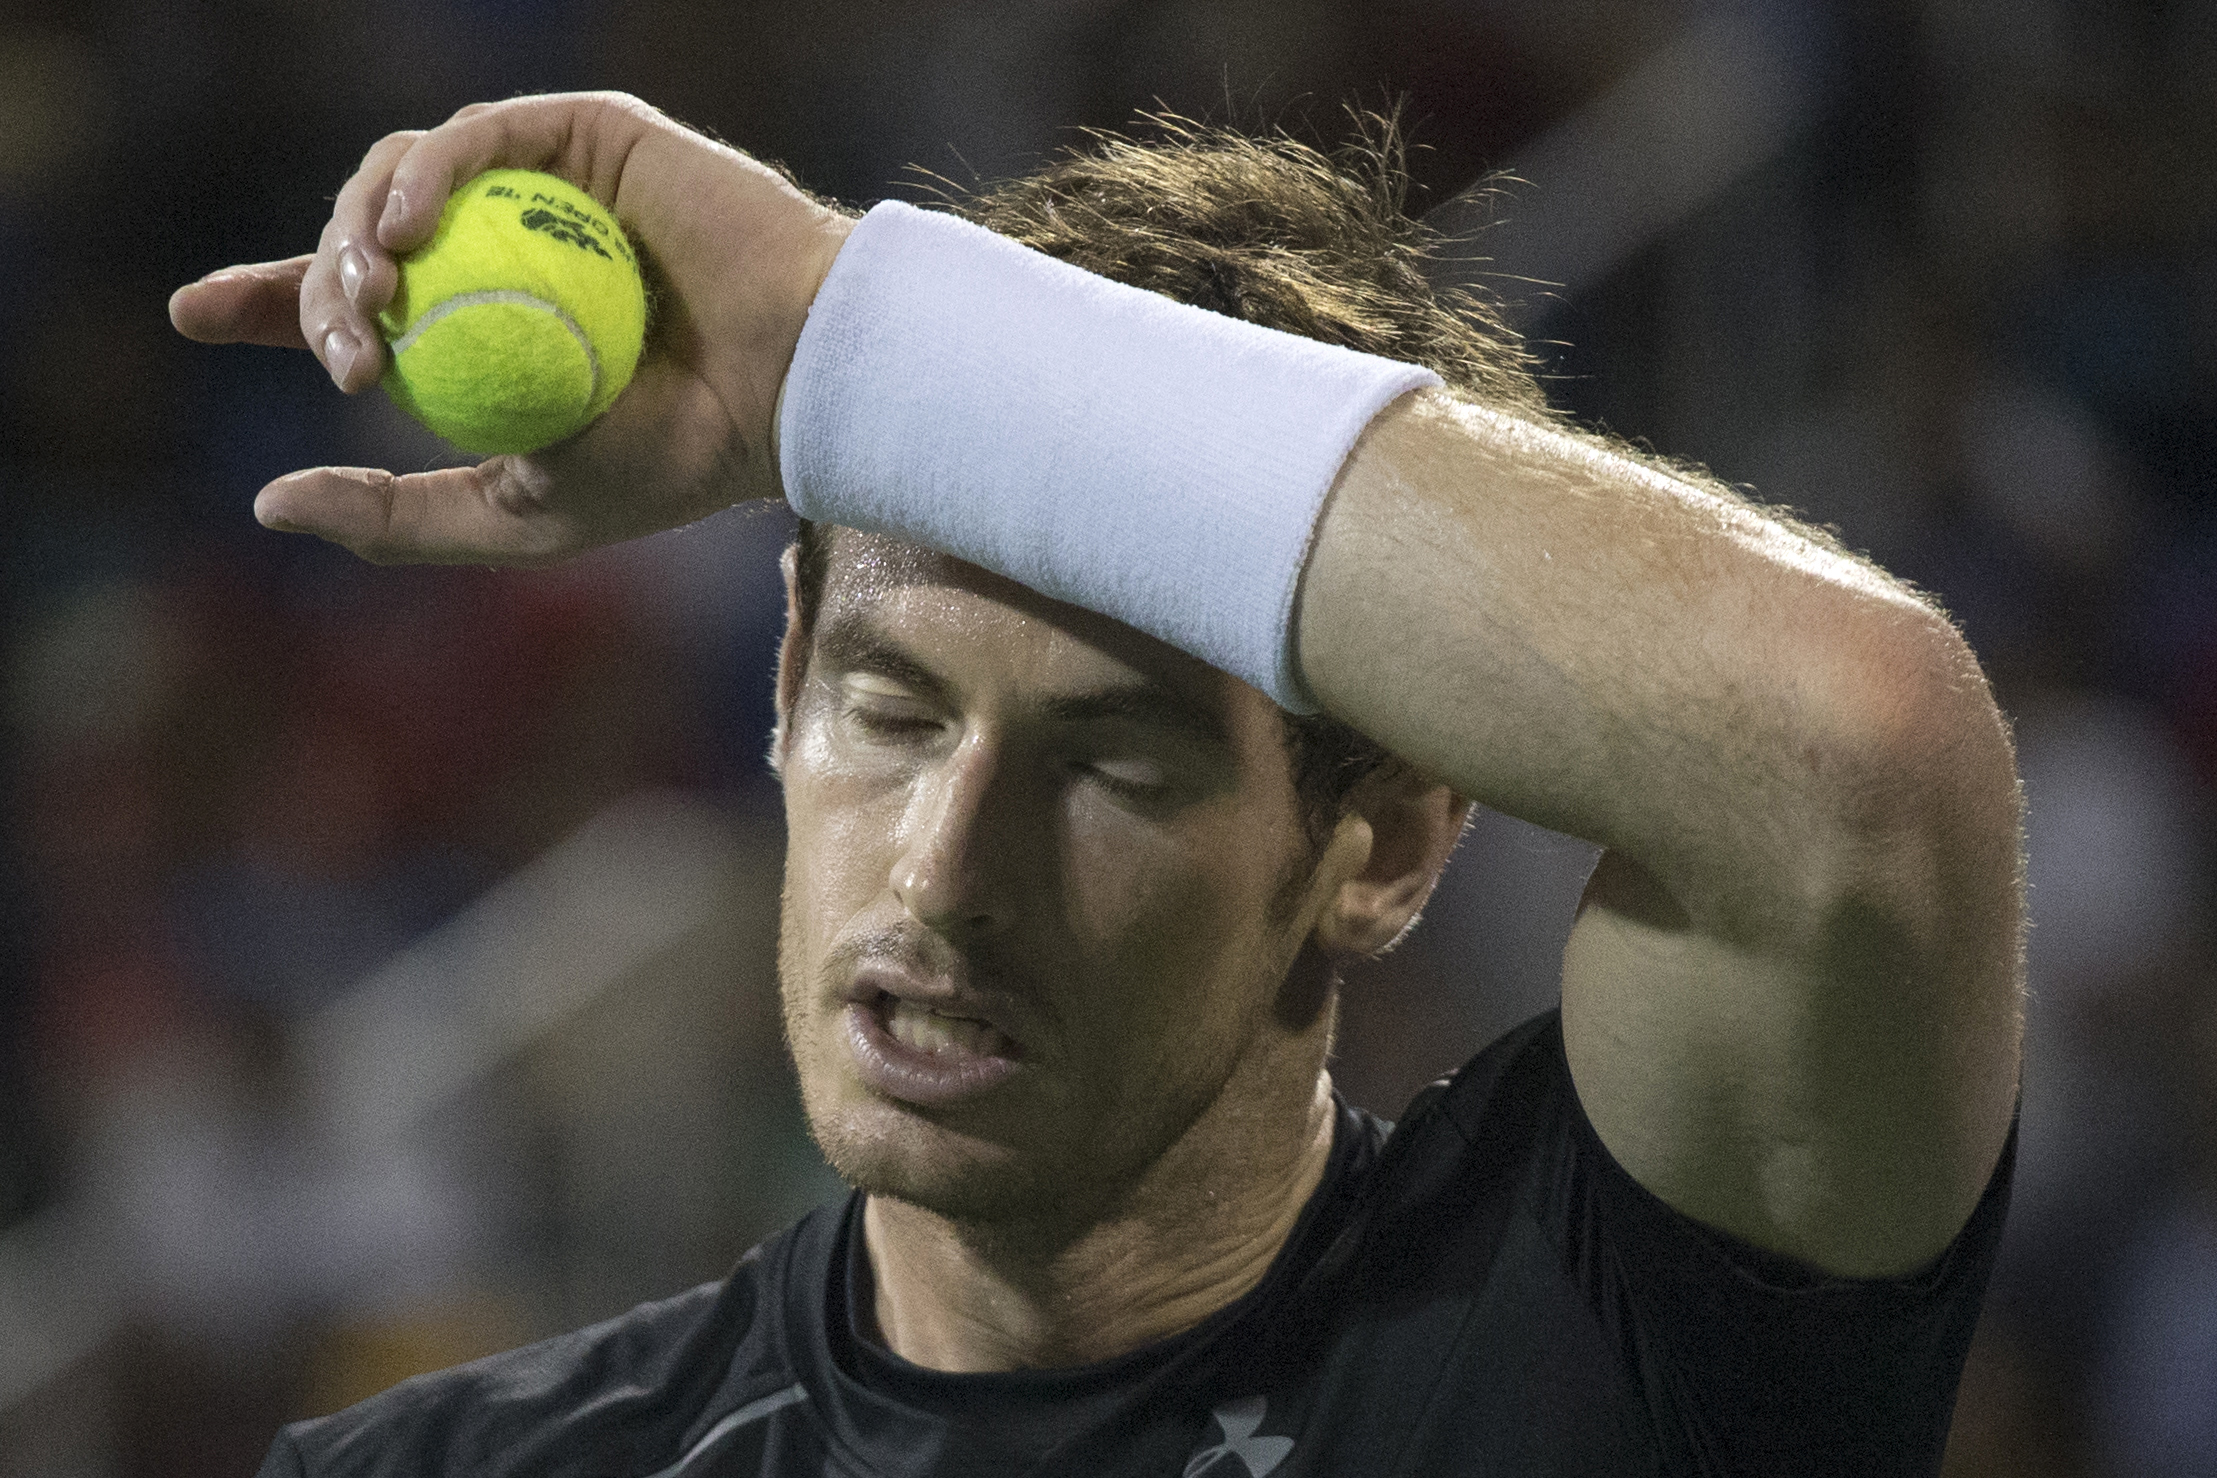 Murray of Britain reacts after losing a point against Anderson of South Africa during their fourth round match at the U.S. Open Championships tennis tournament in New York